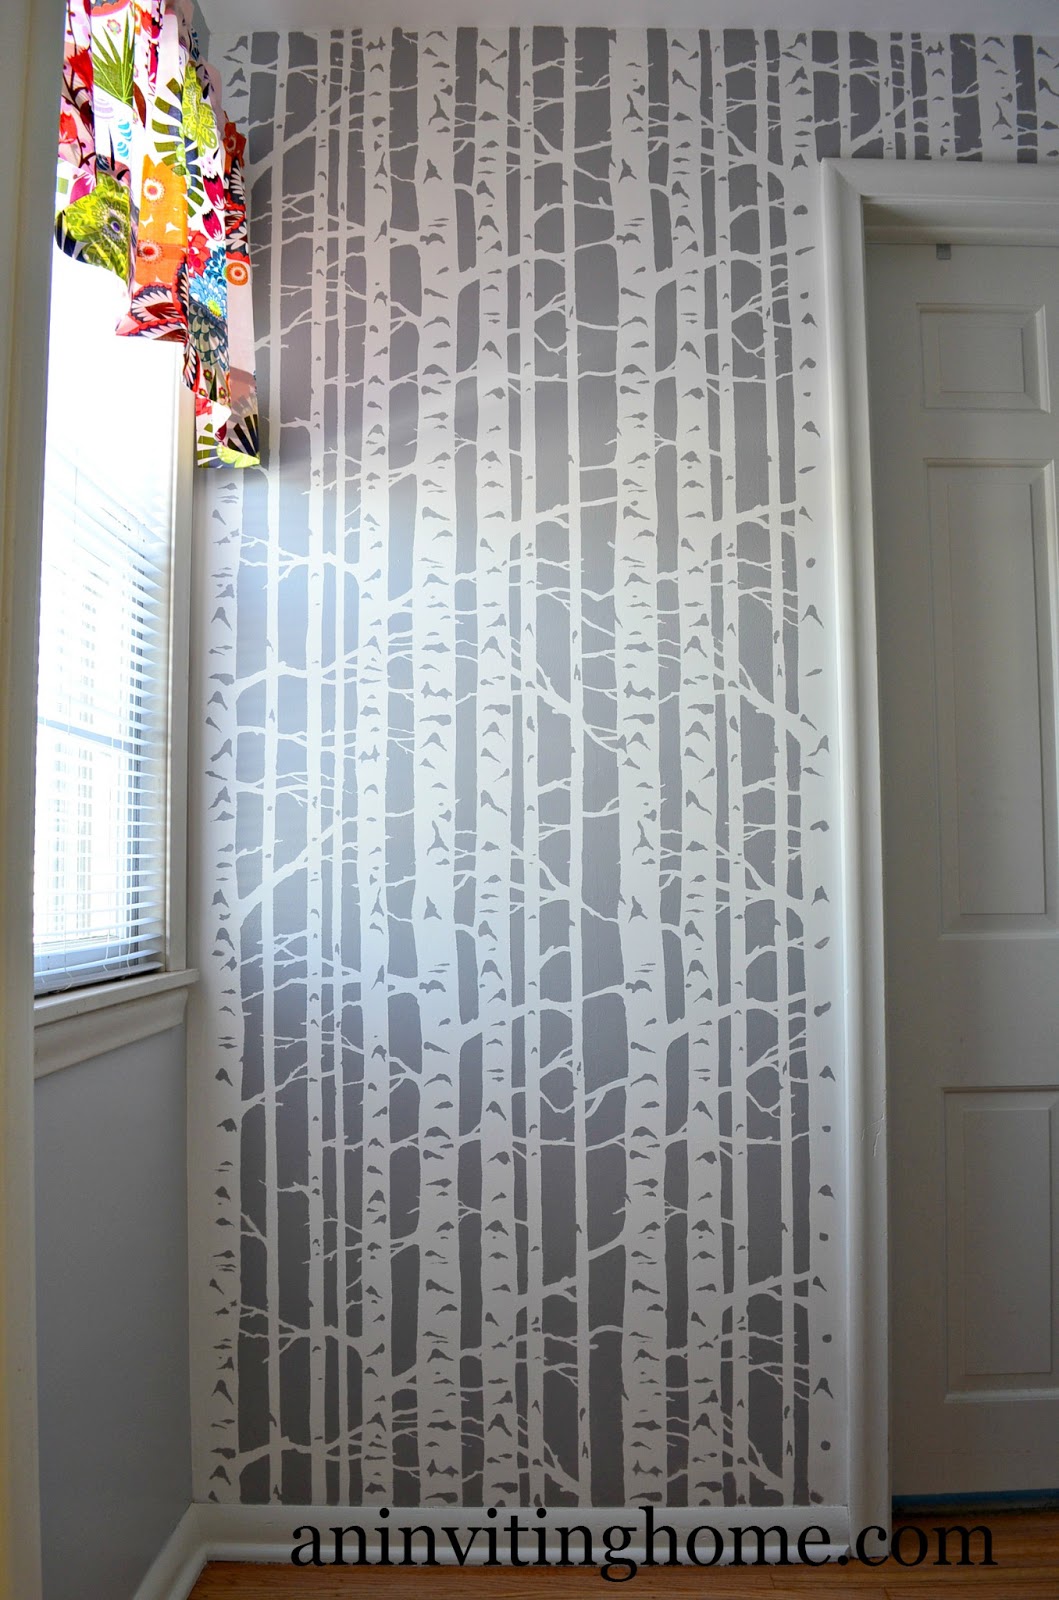 An Inviting Home: My Take On Being Green! ~ The Birch Tree Stencil :D